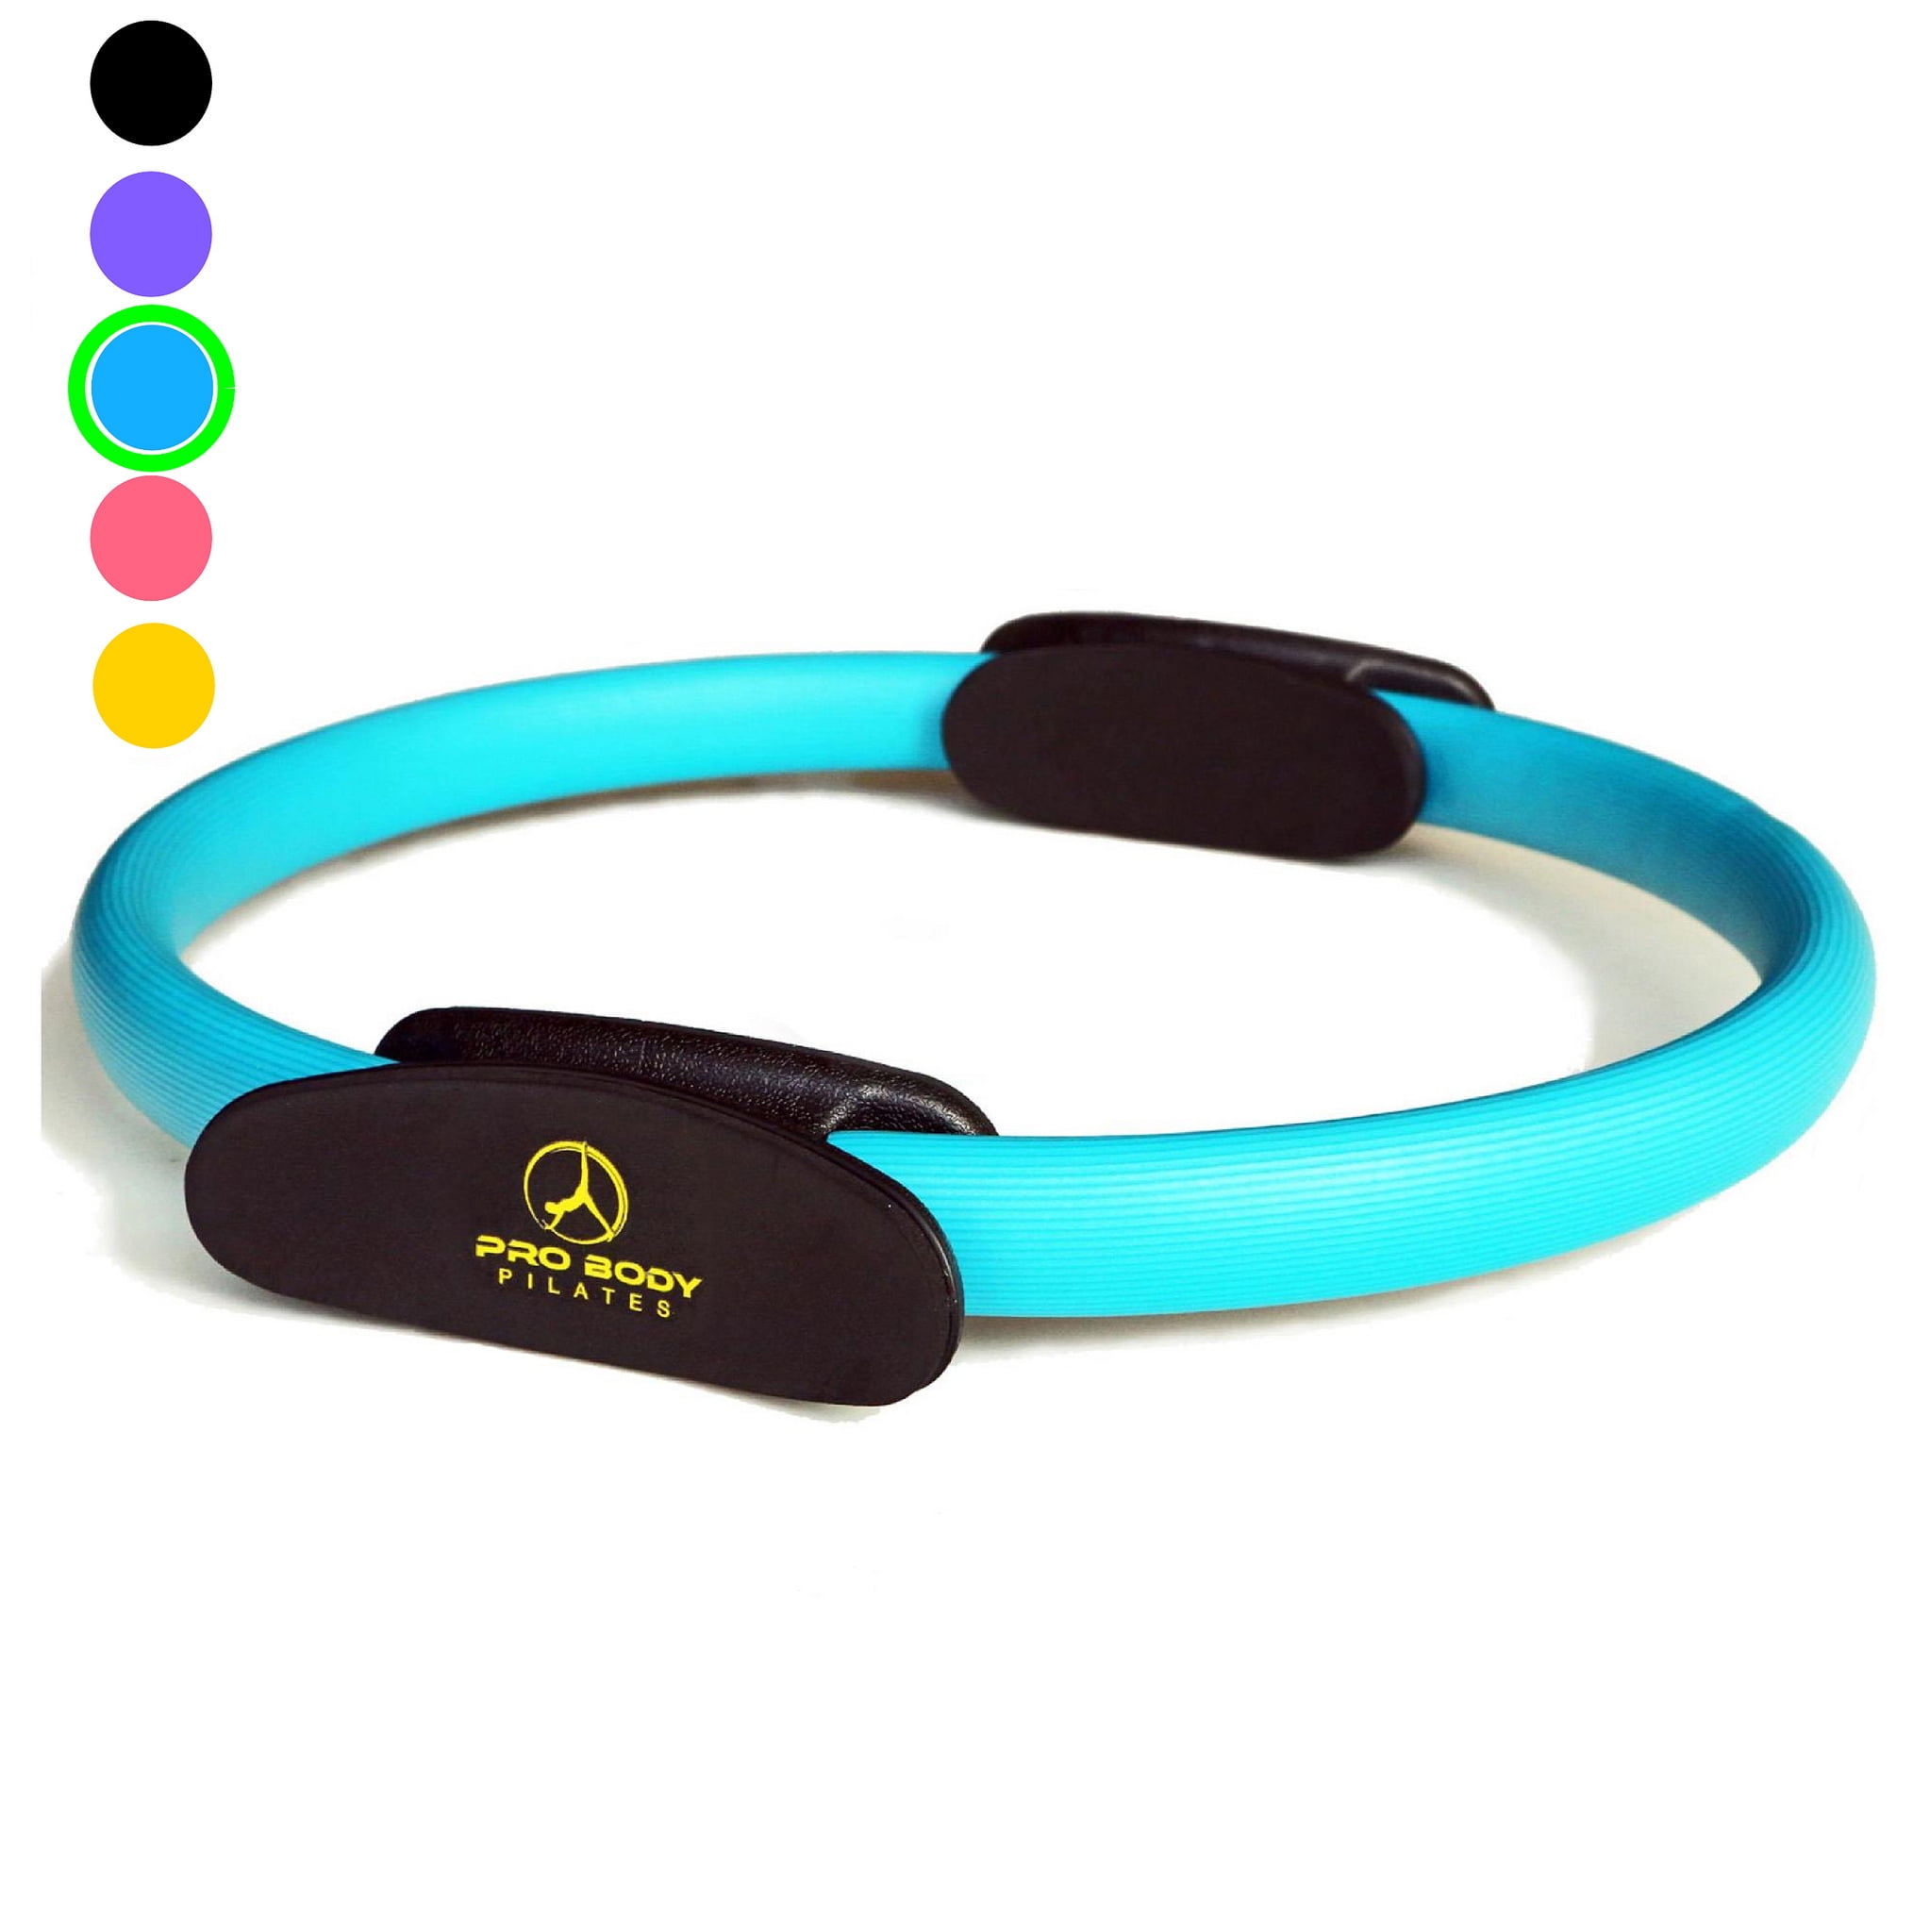 Pilates Fitness Resistance Training Ring Fitness Pilates Ring Magic Circle Pilates Workout Circle Double Handle Pilates Yoga Ring Exercise Fitness Circle for Toning and Strengthening 37cm/15inch